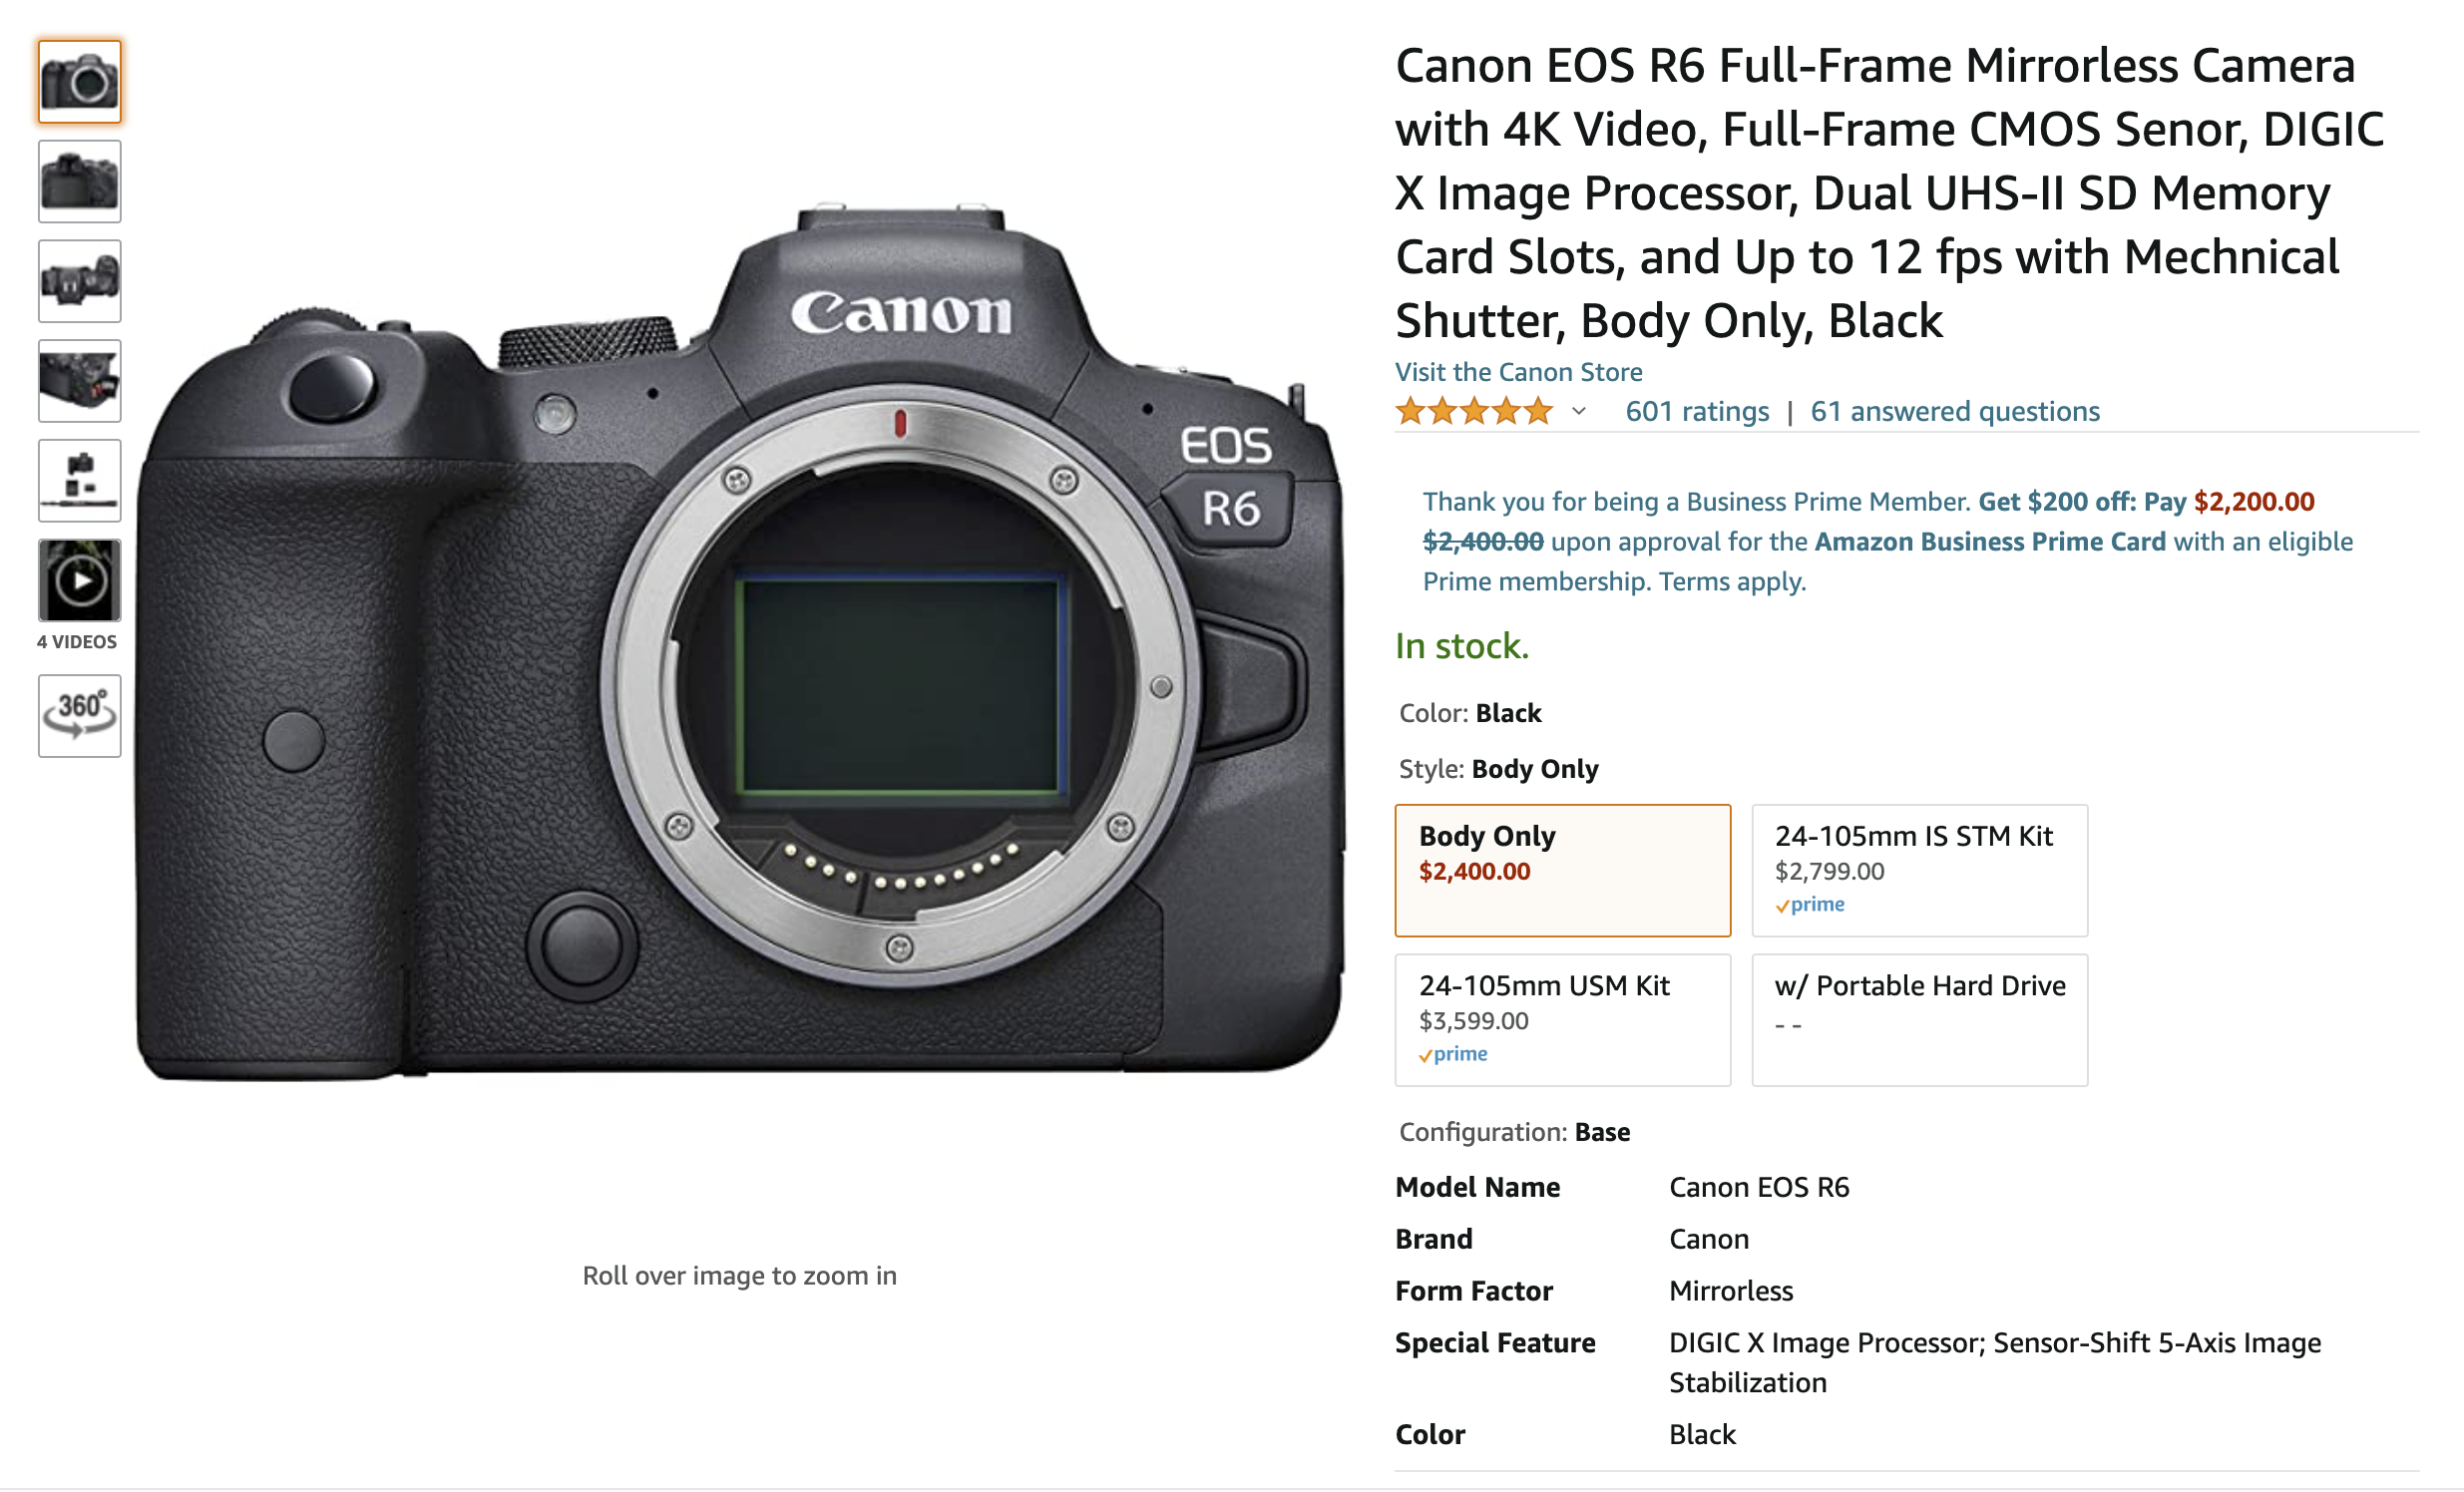 Get a Used, Like New Canon EOS R6 Slightly Cheaper